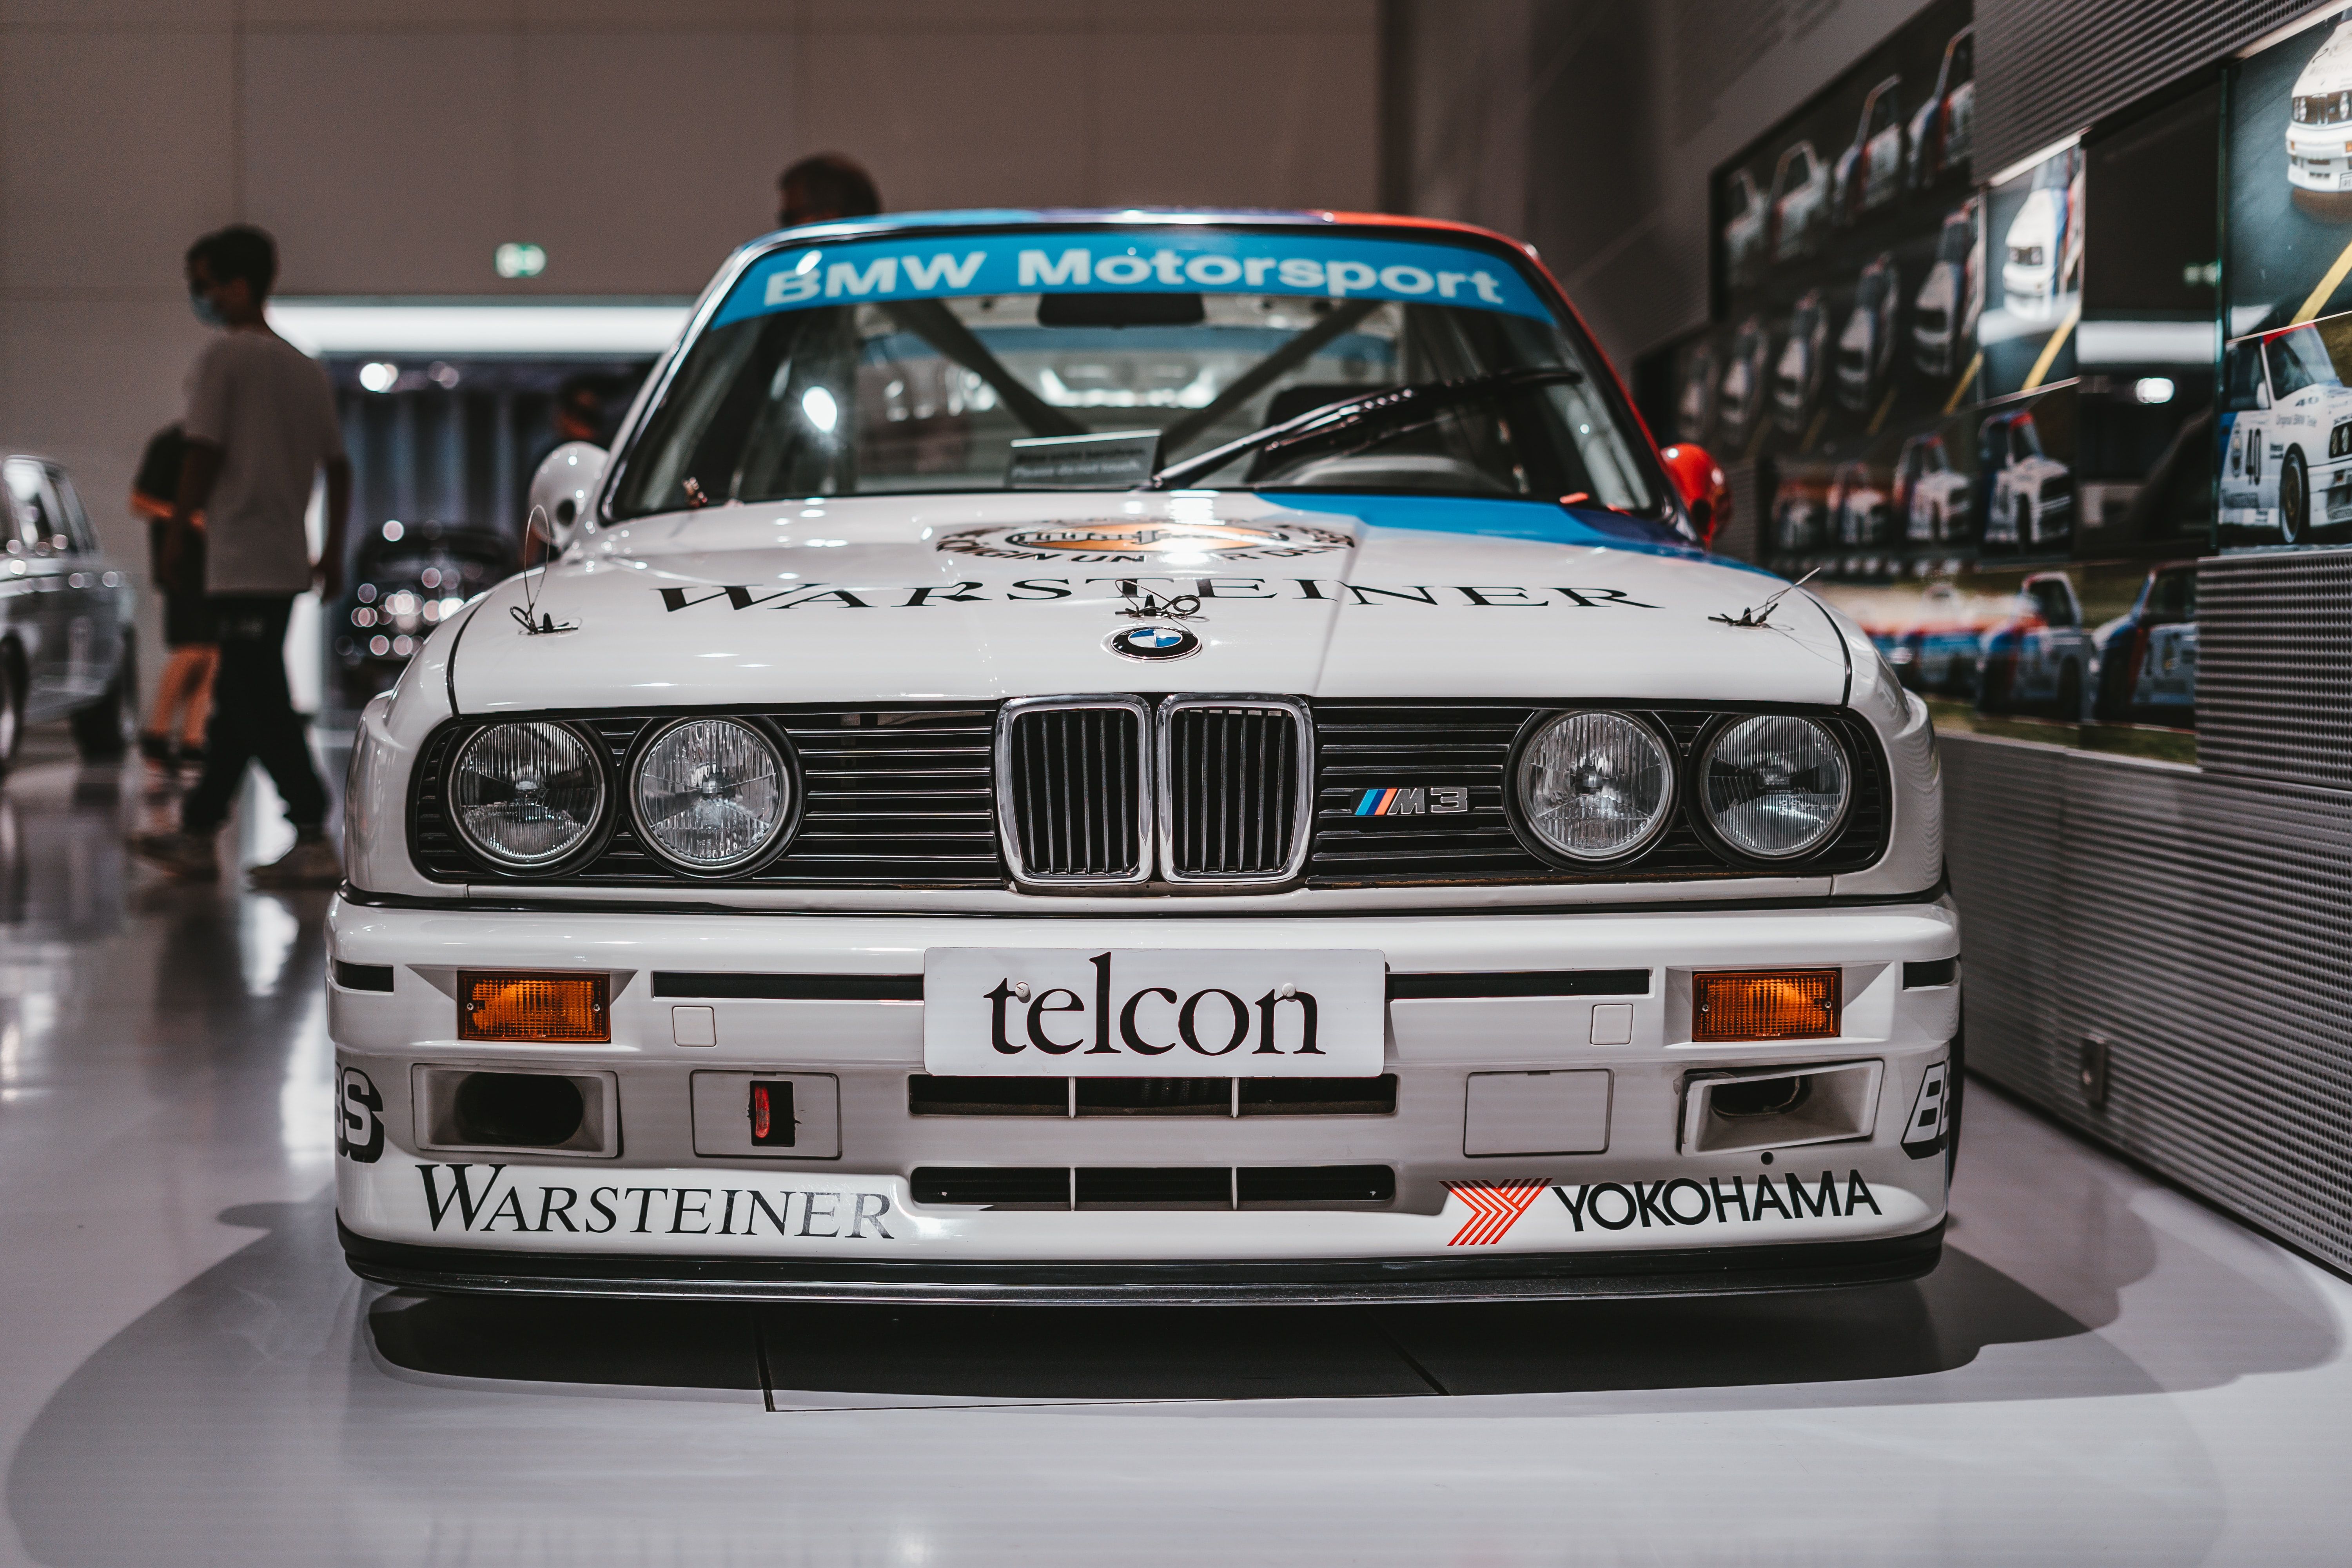 White Racing M3 E30 at exhibition